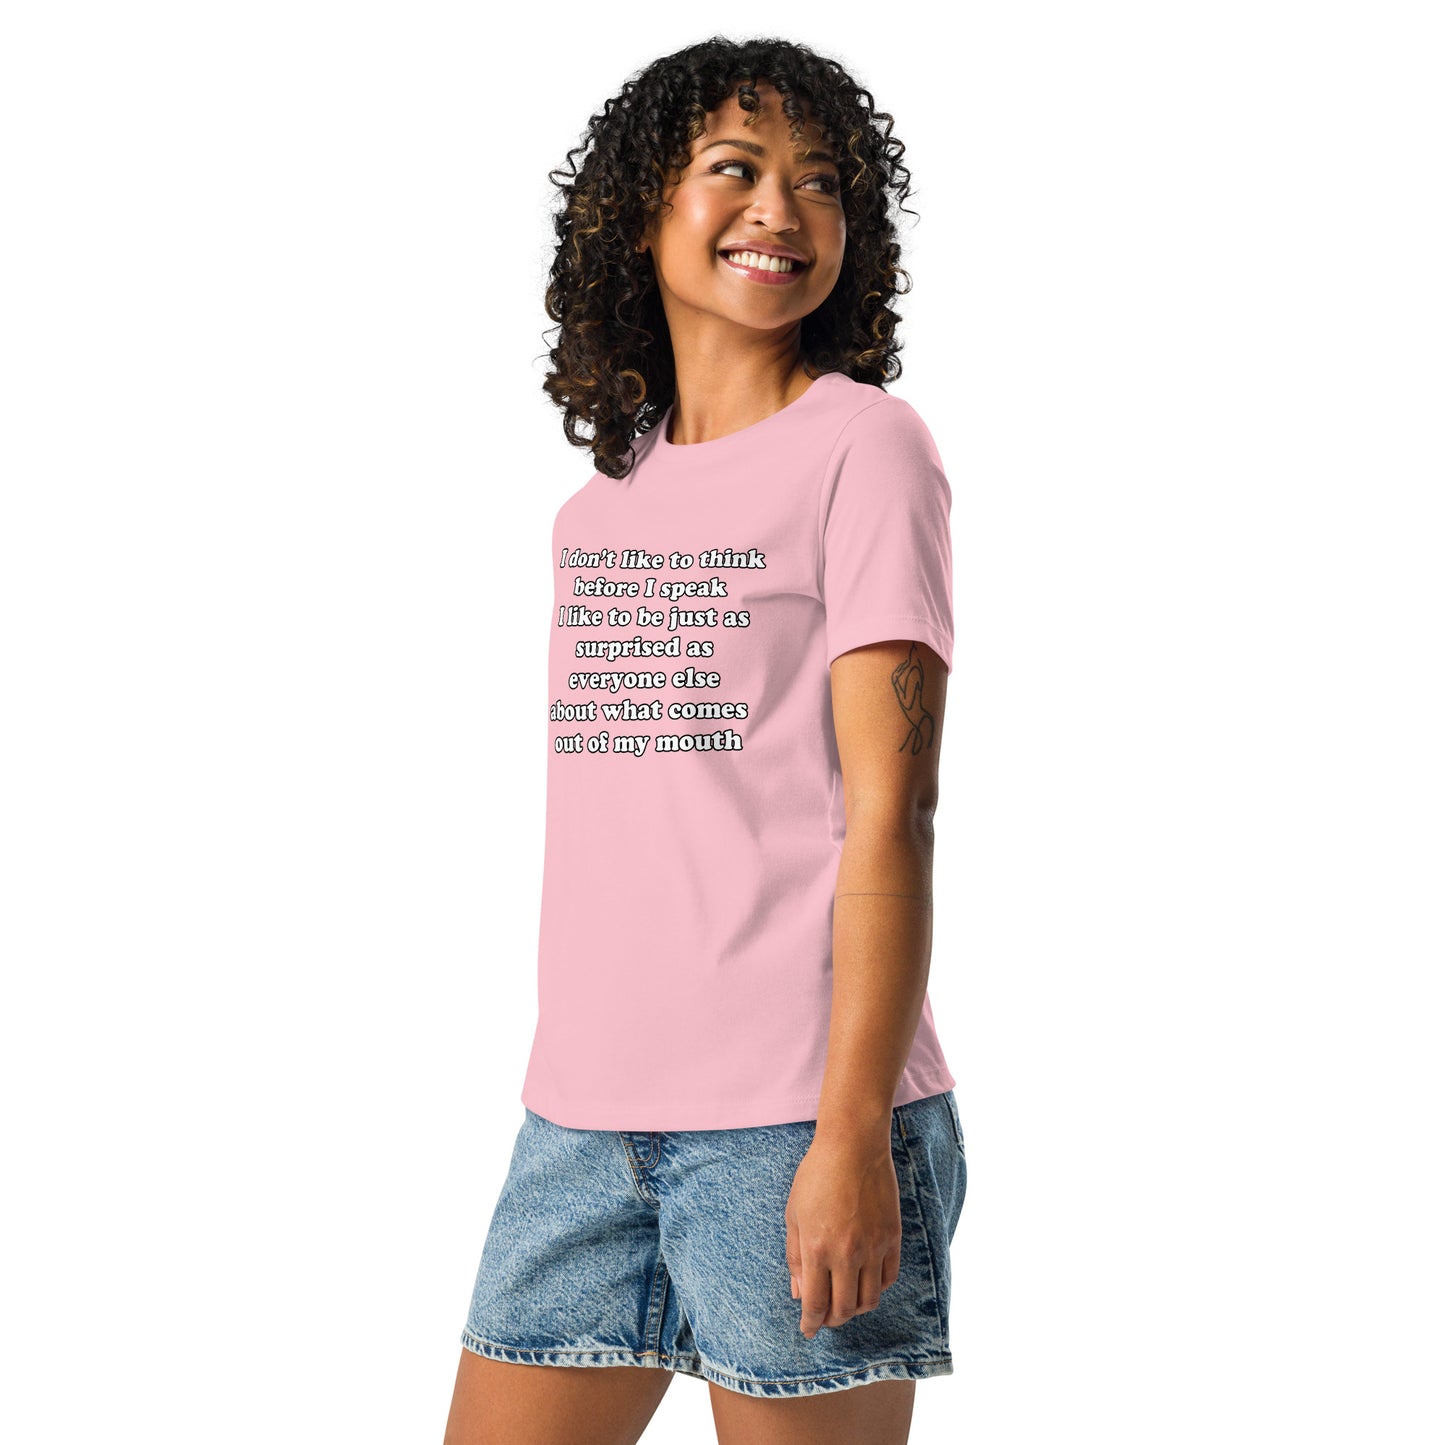 Woman with pink t-shirt with text “I don't think before I speak Just as serprised as everyone about what comes out of my mouth"